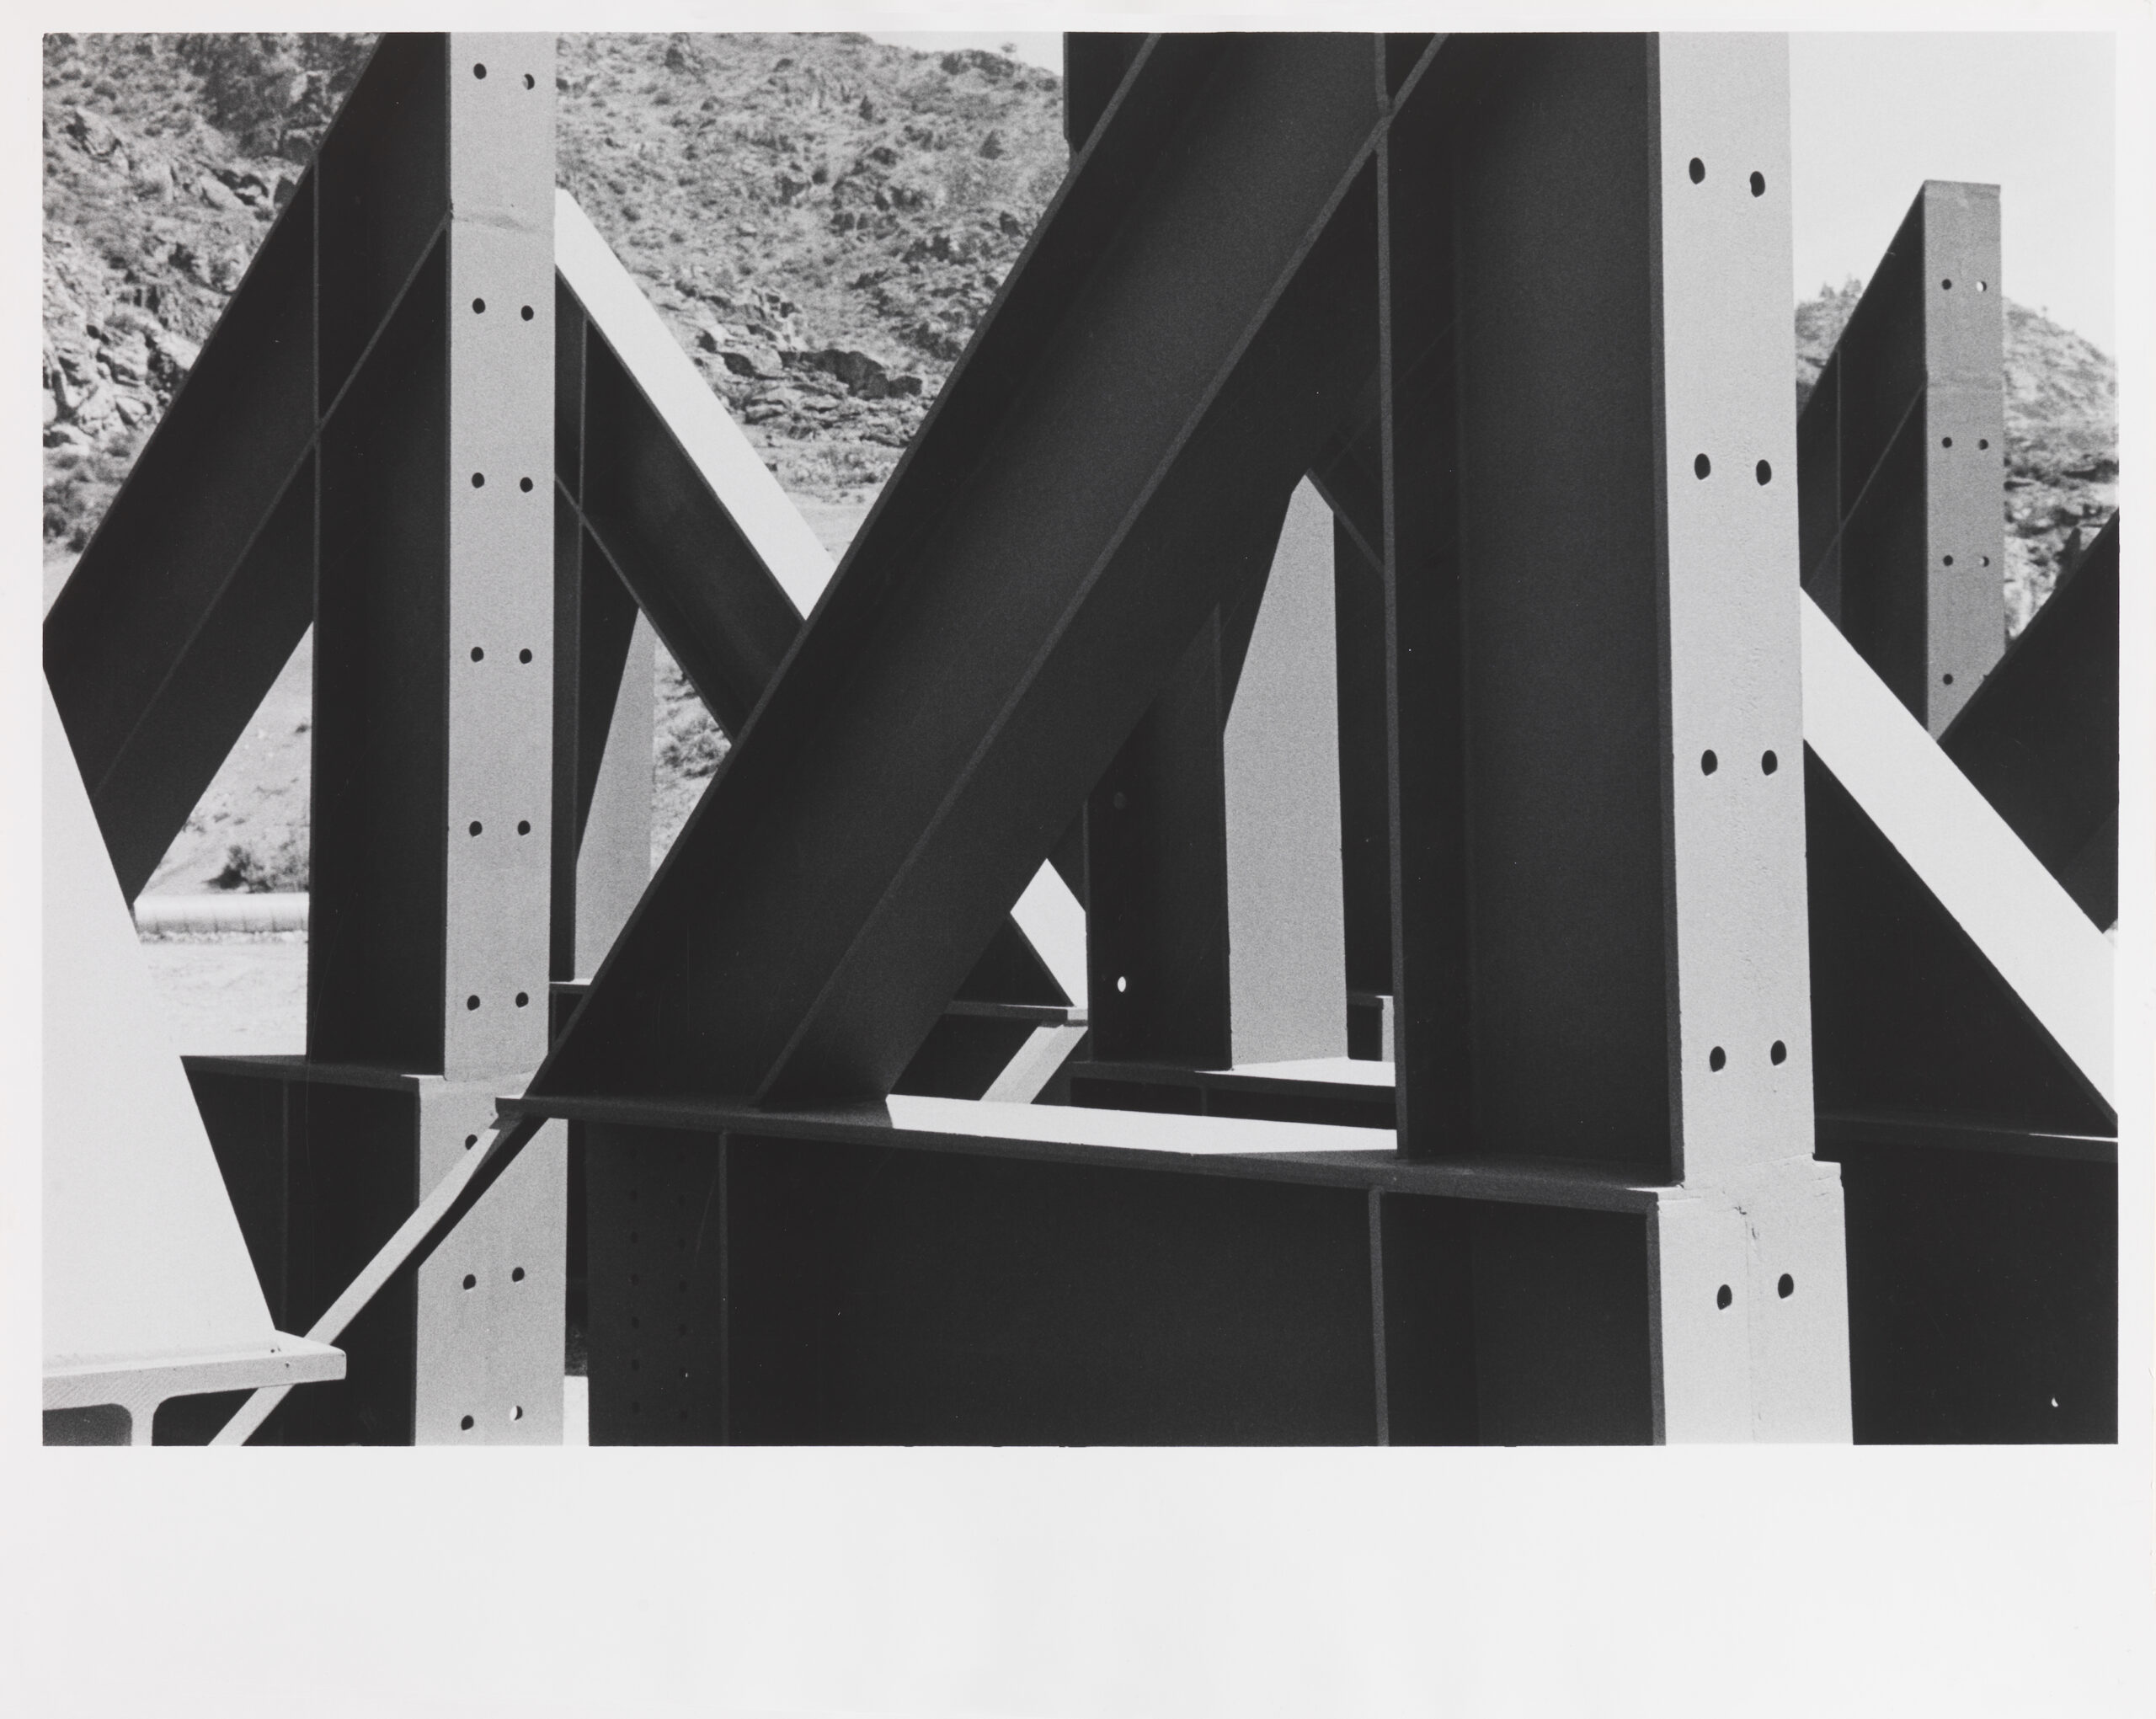 Black and white photograph of girders of the Coulee dam set against rough terrain.